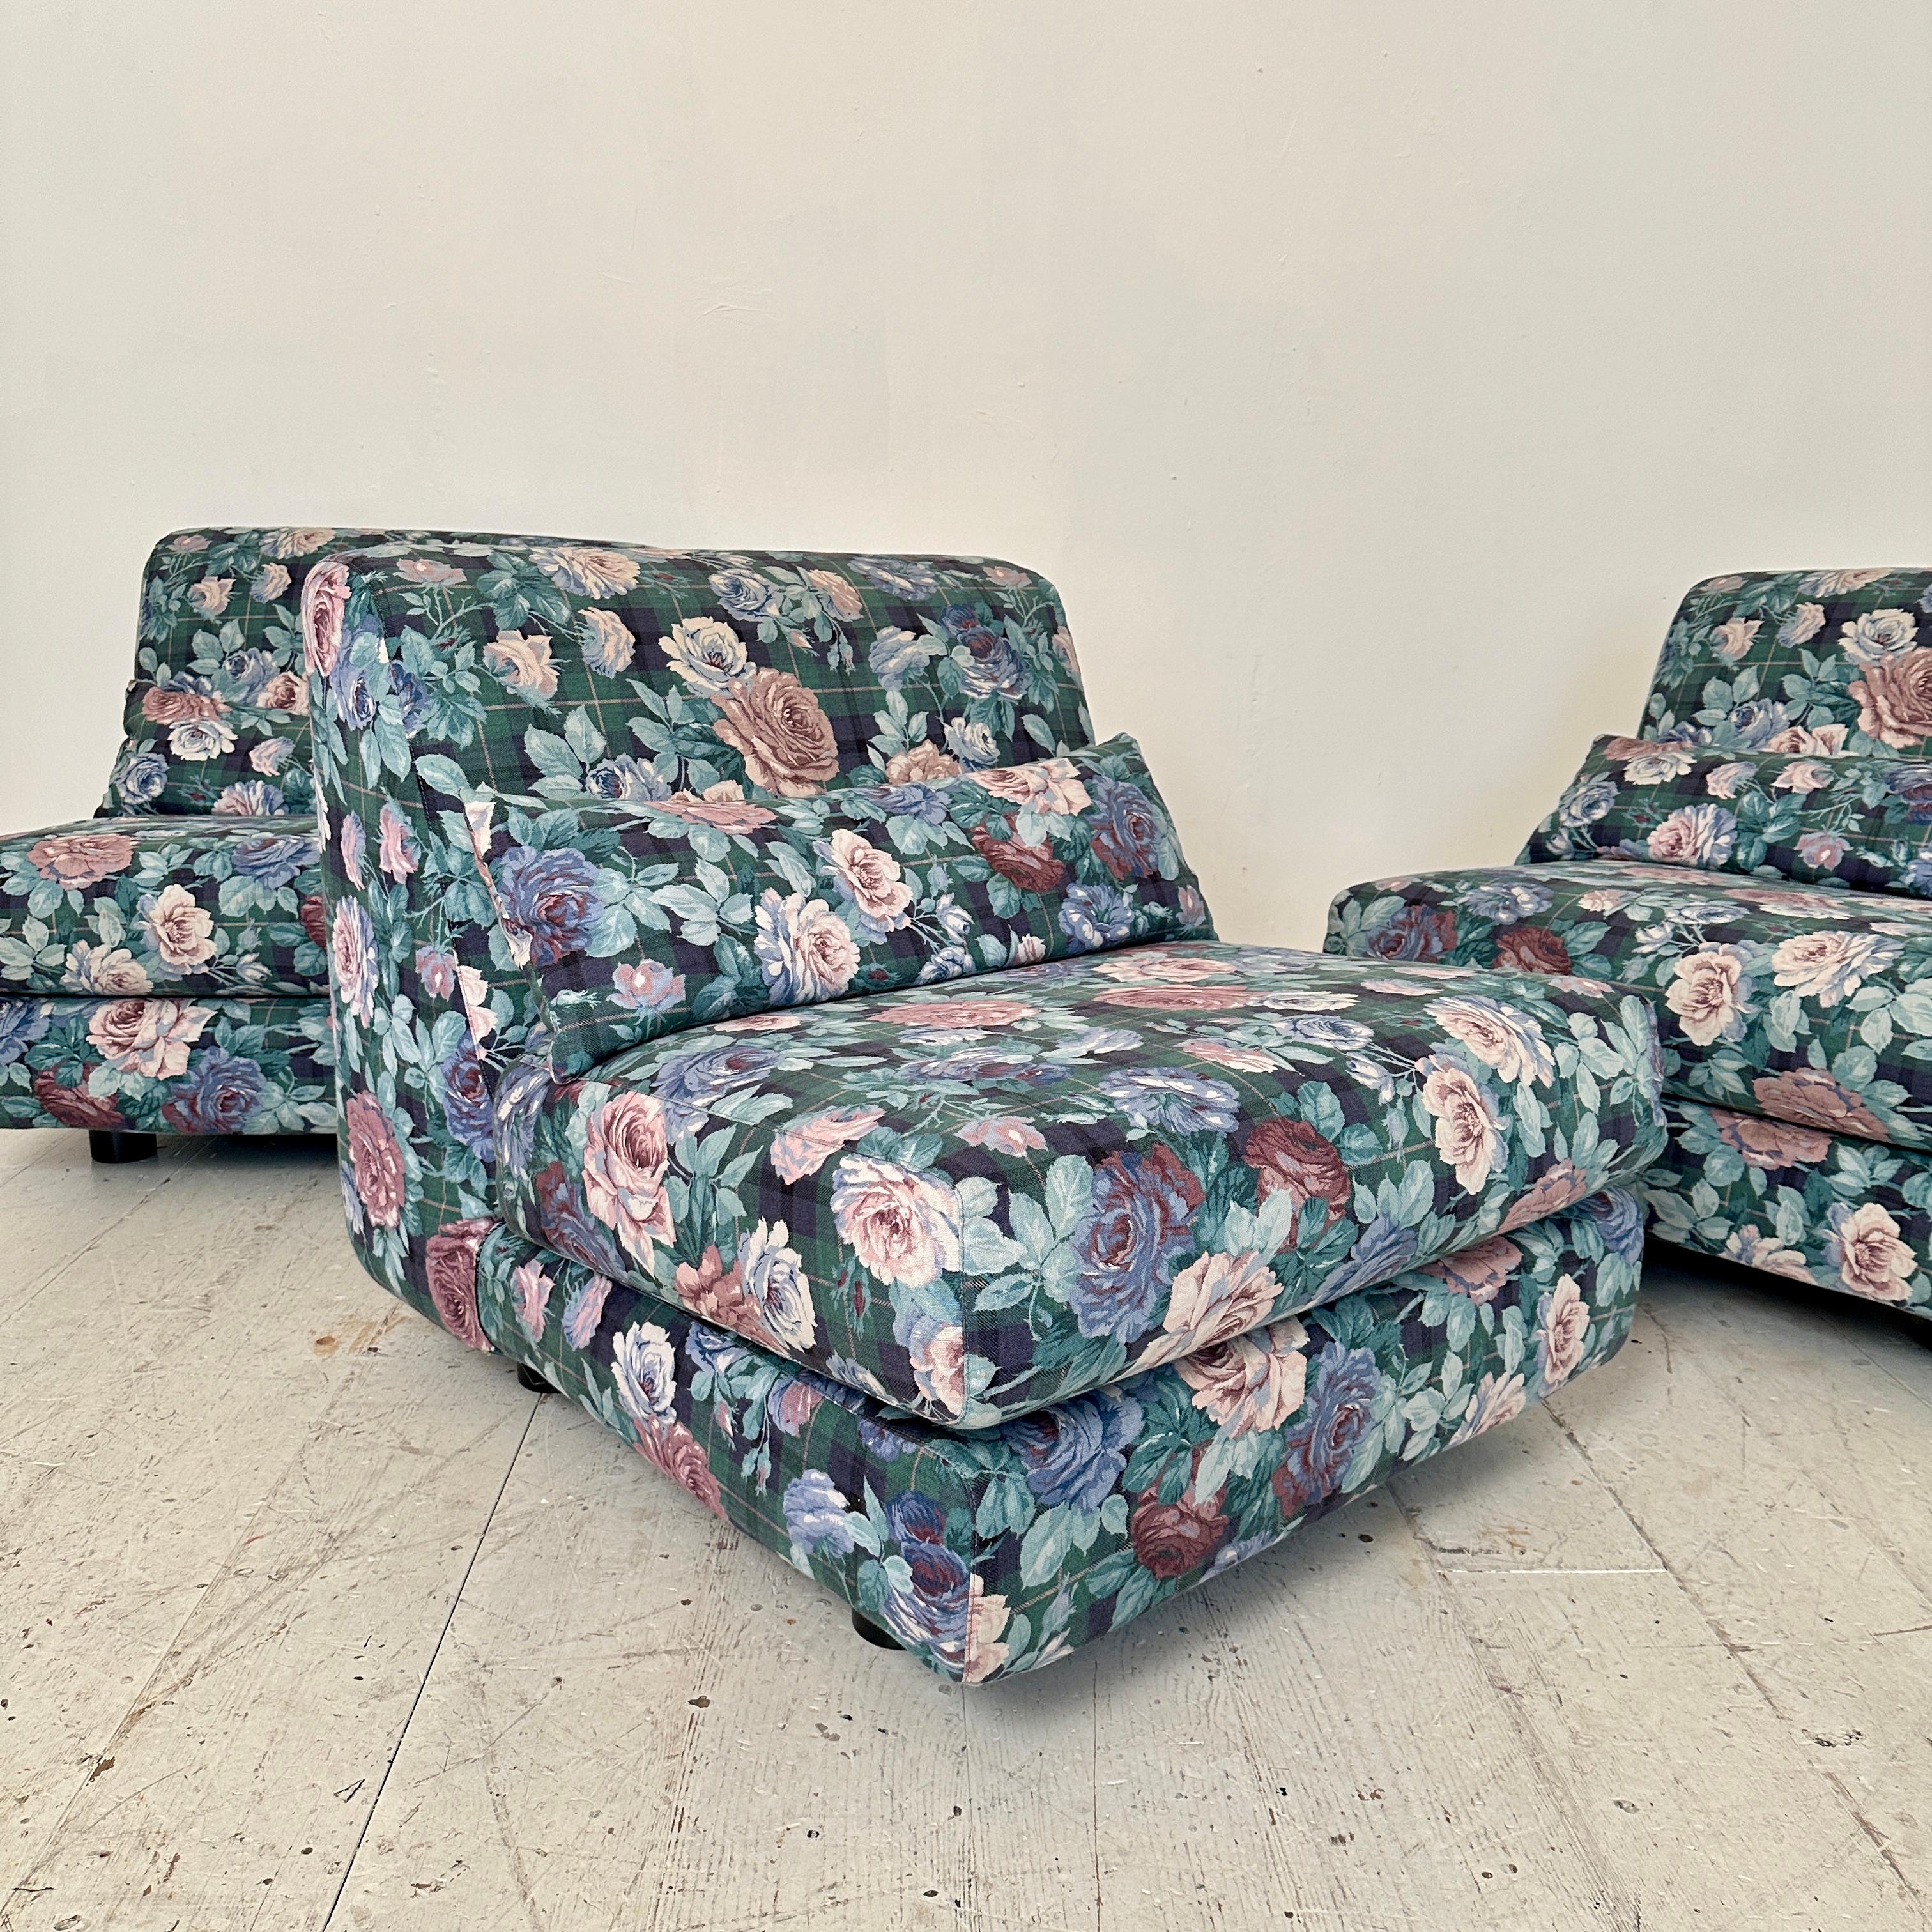 Mid Century Italian Modular Sofa in 3 Pieces with a Flower Fabric, around 1970 For Sale 2